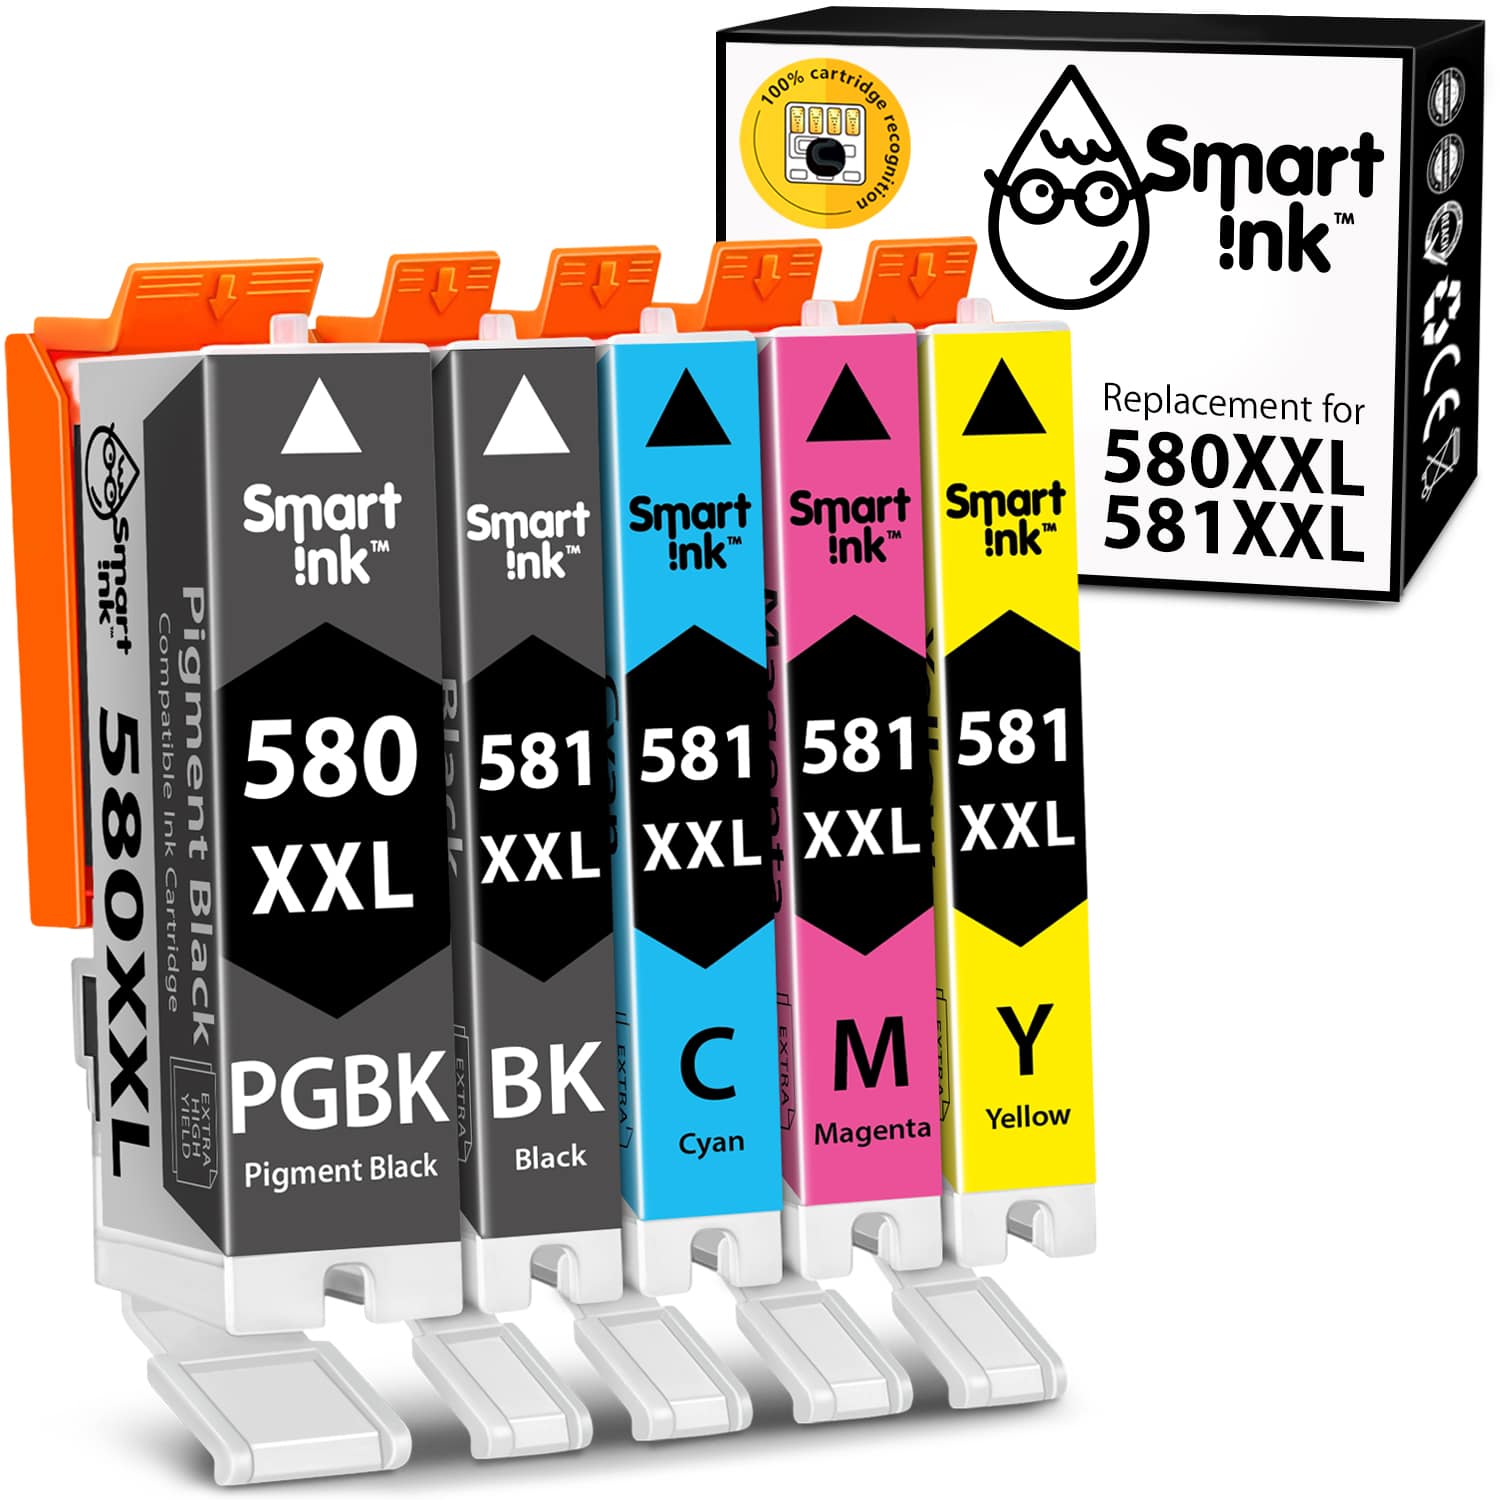 Buy Compatible Canon 580 Ink Canon 581 XXL Cartridge Replacement (5 pack),  Smart Ink